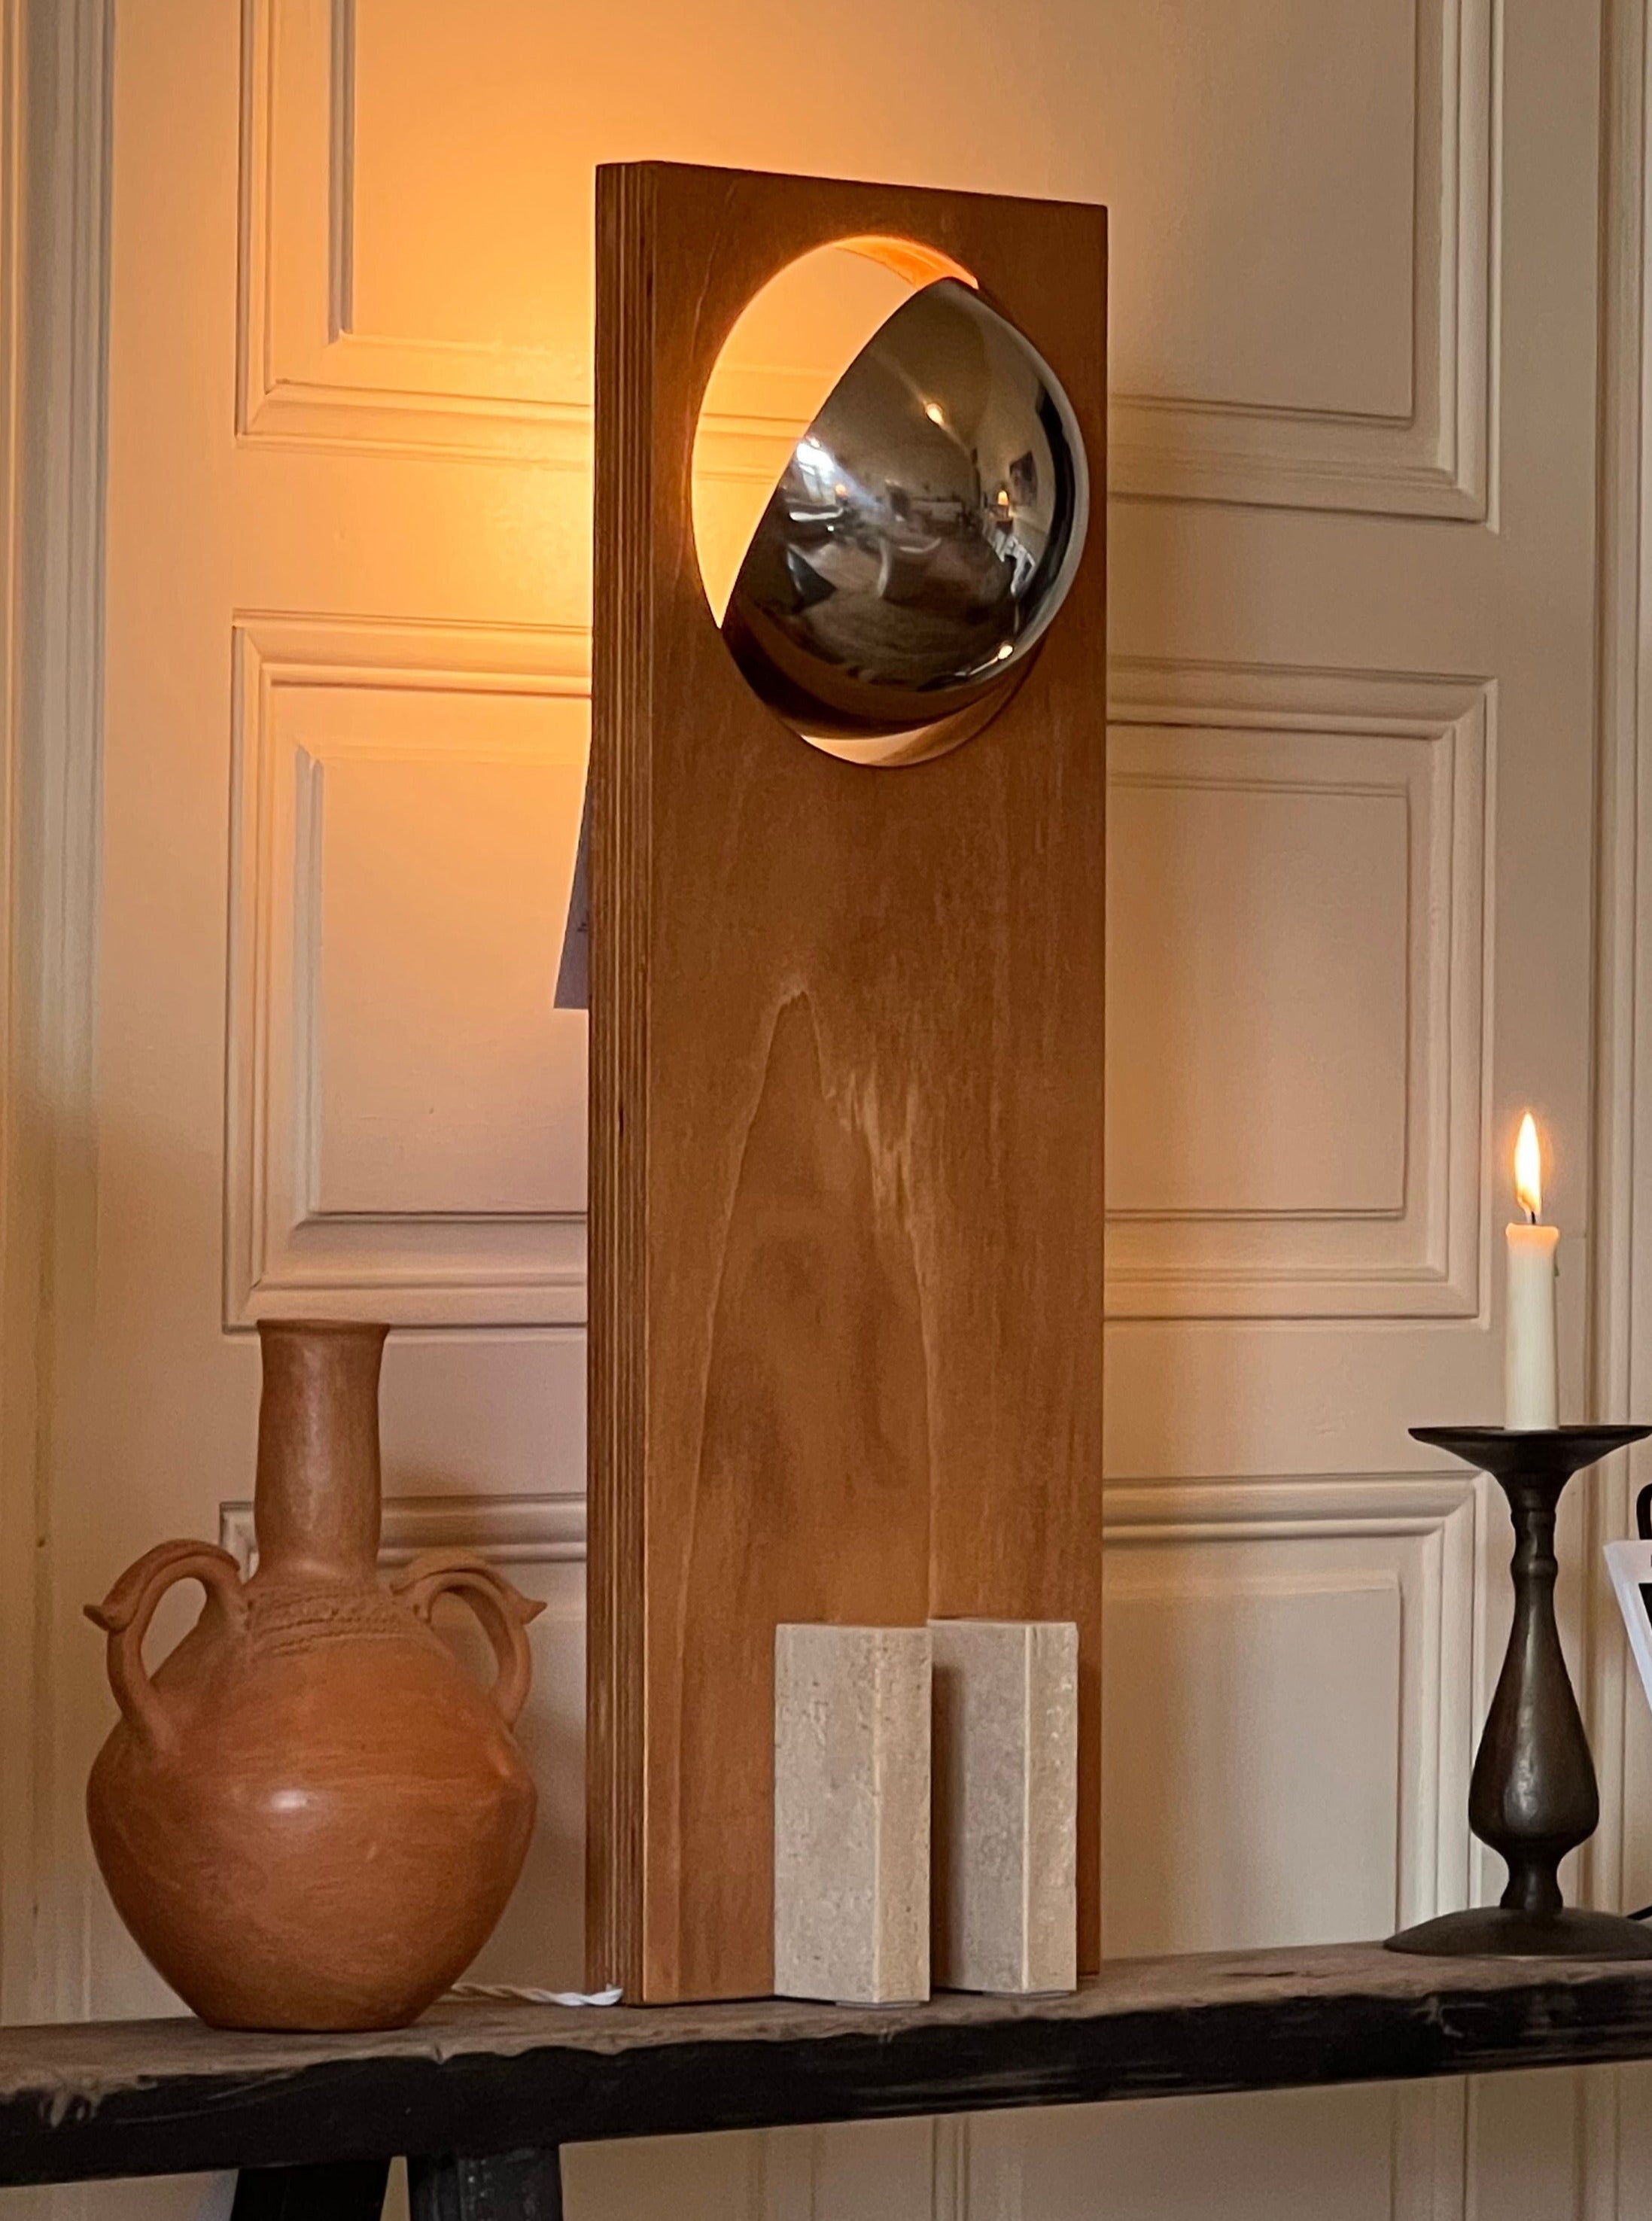 A Galileo 2.3 console displays a modern convex mirror mounted on a tall, wooden rectangular frame, accompanied by a rustic pottery vase and a lit table lamp, against a paneled wall. [Edoardo Lietti Studio]